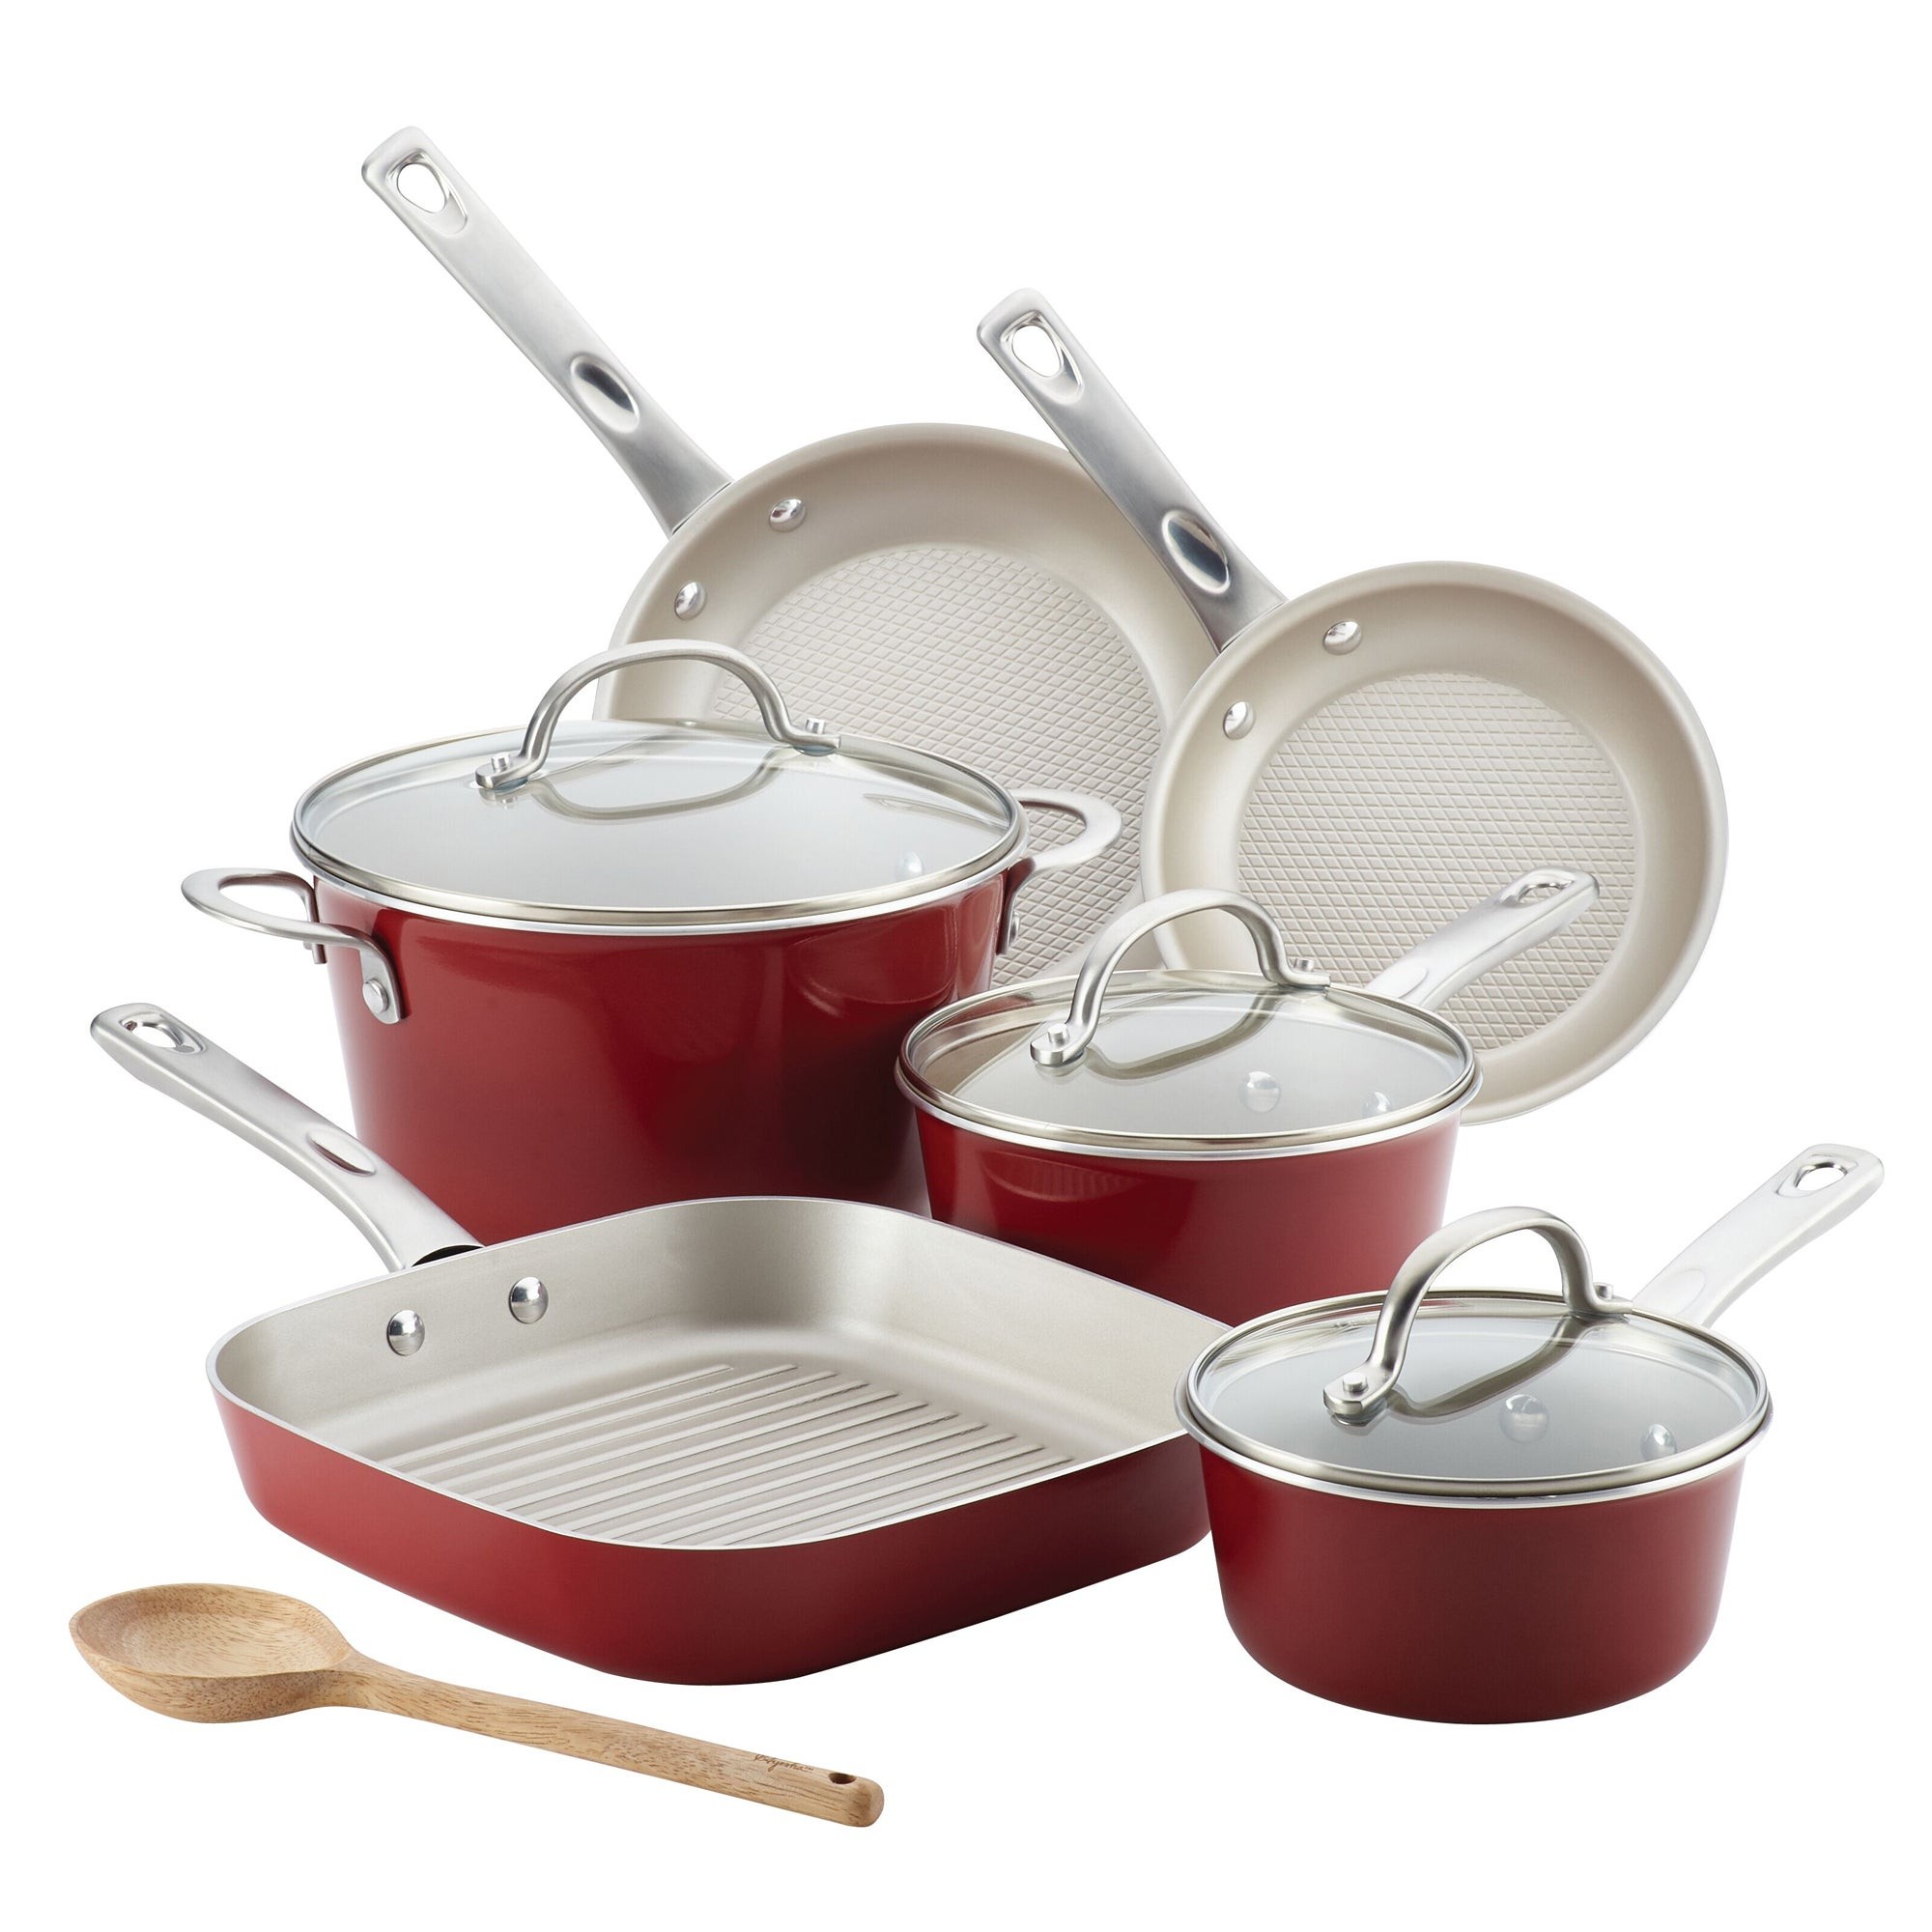 10pc Home Collection Porcelain Enamel Nonstick Cookware Set Sienna Red